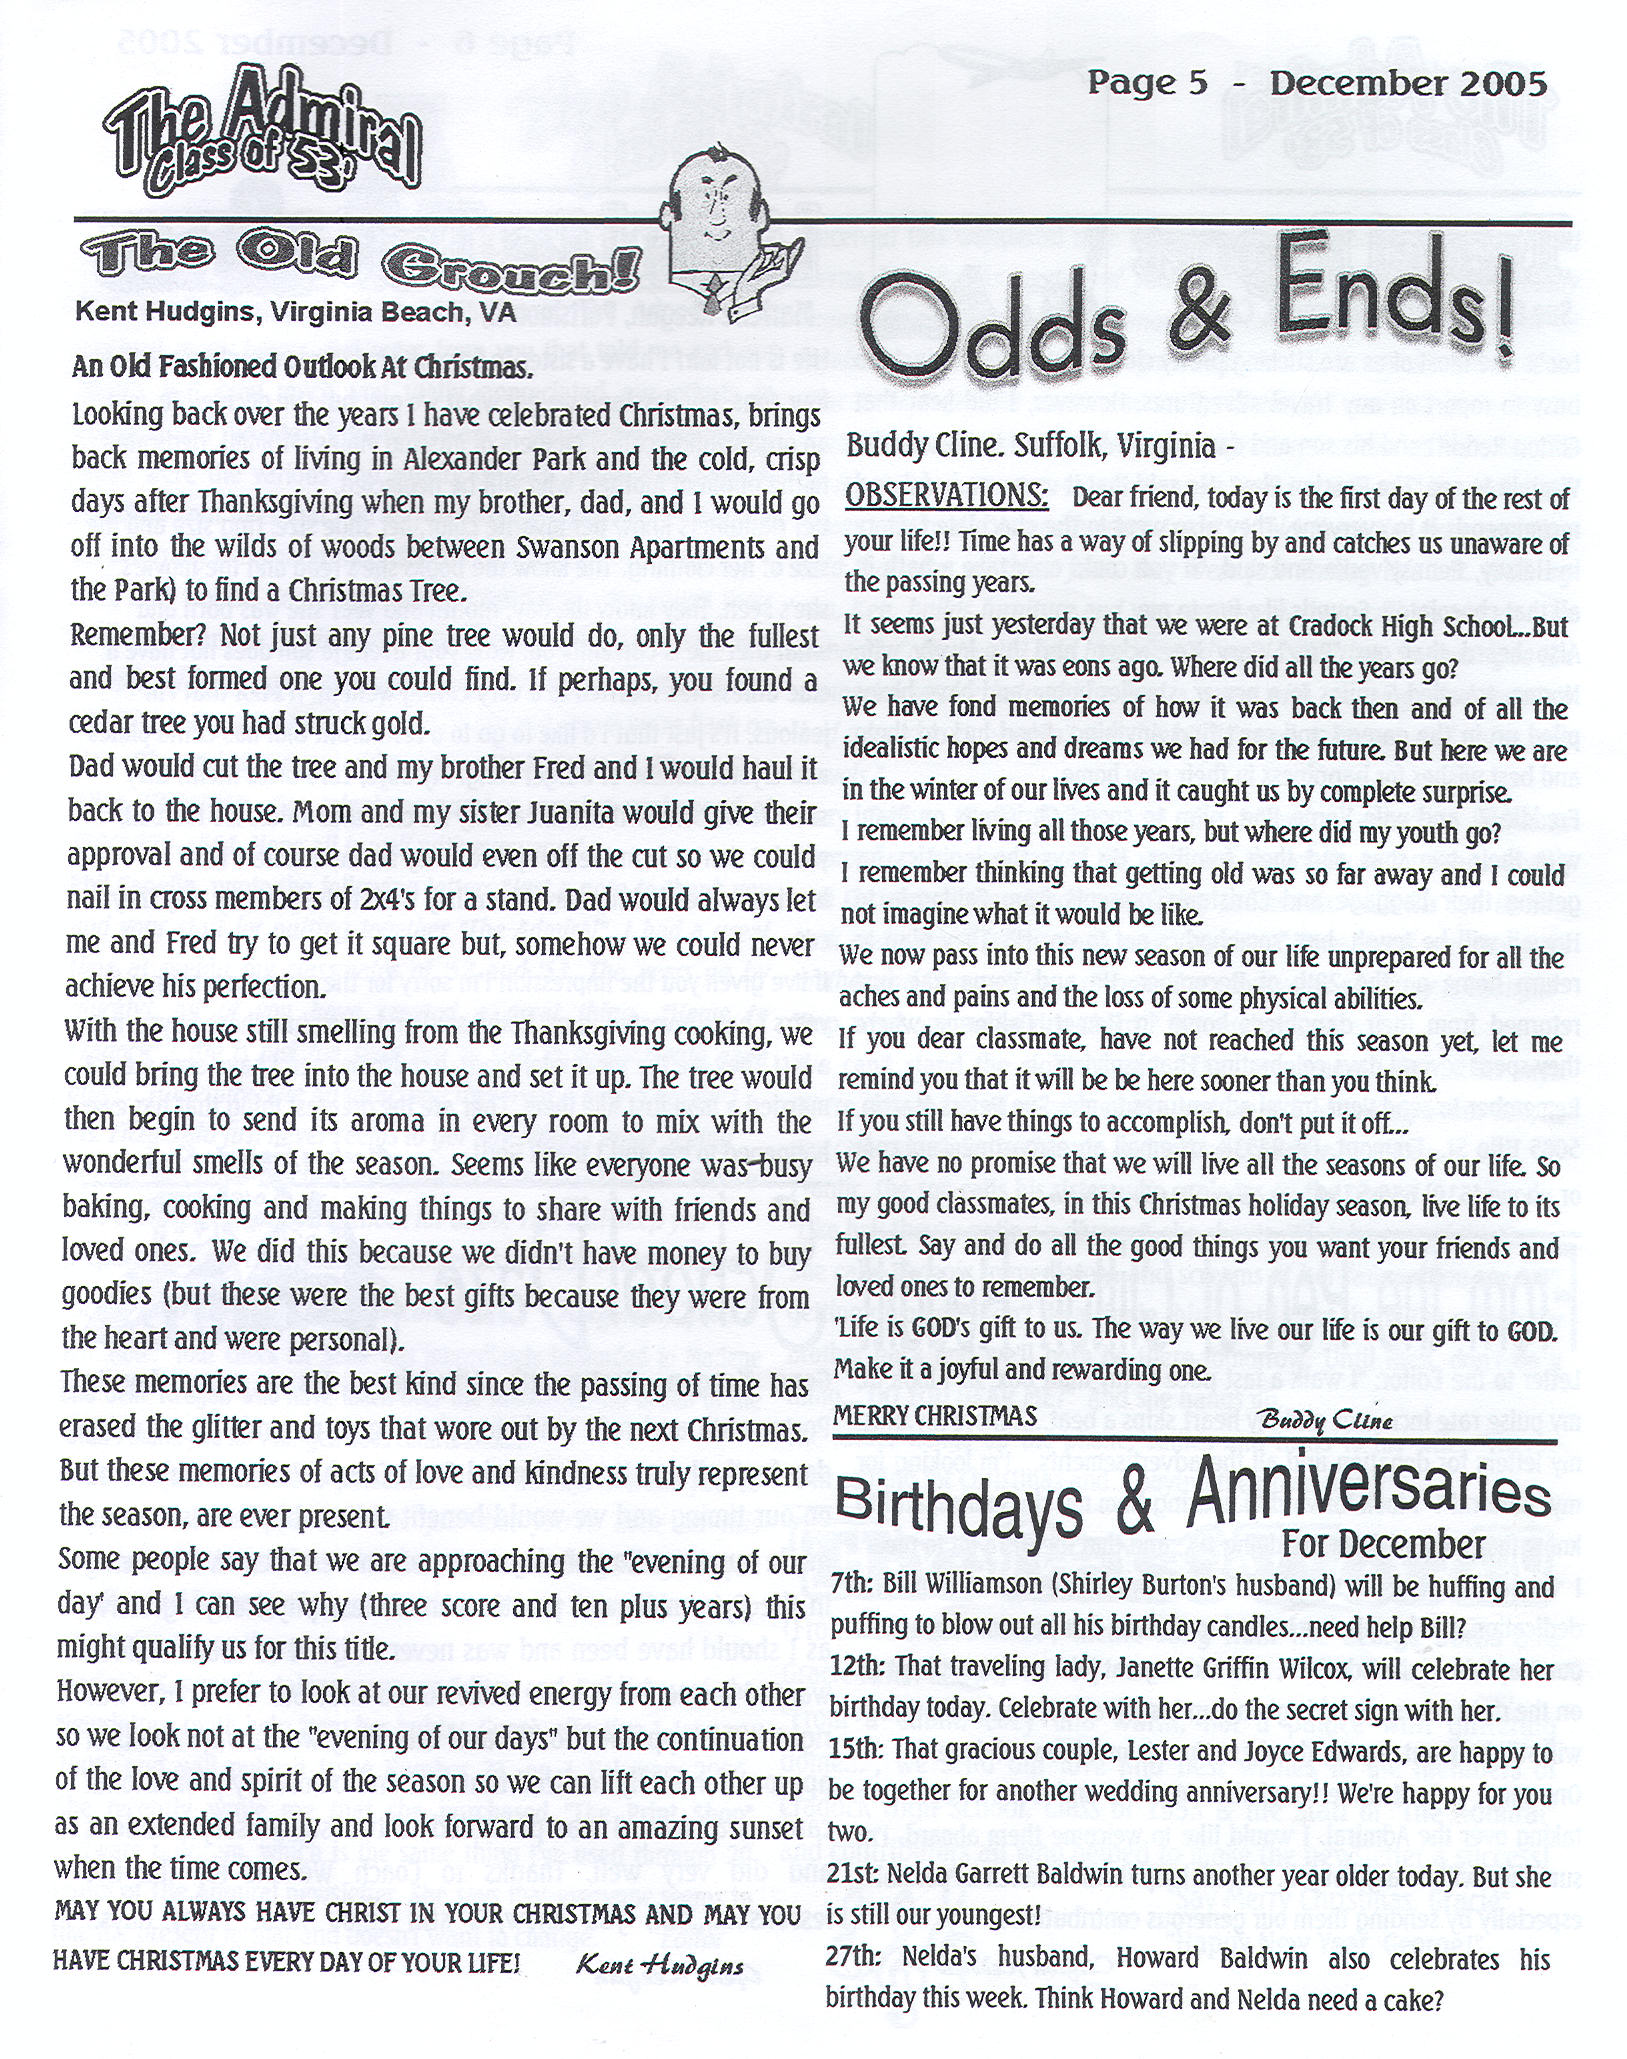 The Admiral - December 2005 - pg. 5